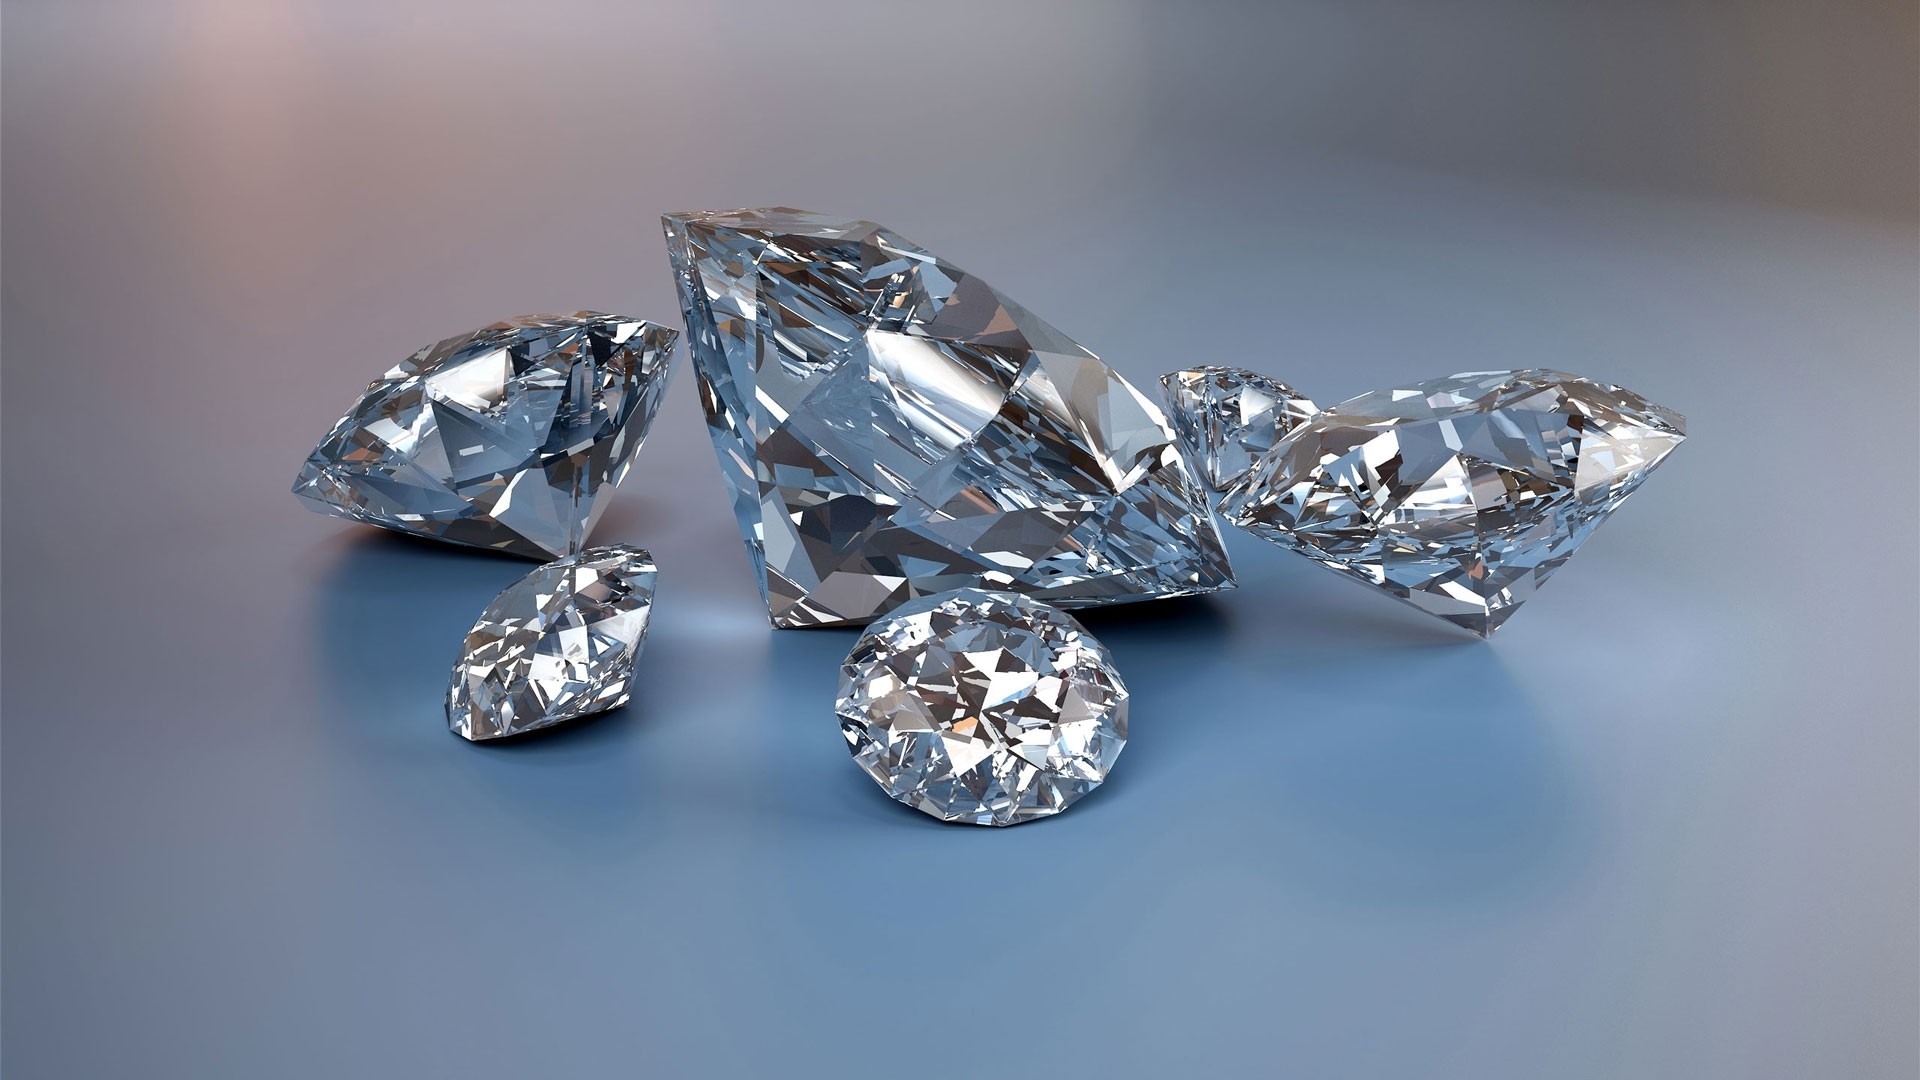 1920x1080 Title : diamond wallpapers hd pictures – one hd wallpaper pictures.  Dimension : 1920 x 1080. File Type : JPG/JPEG